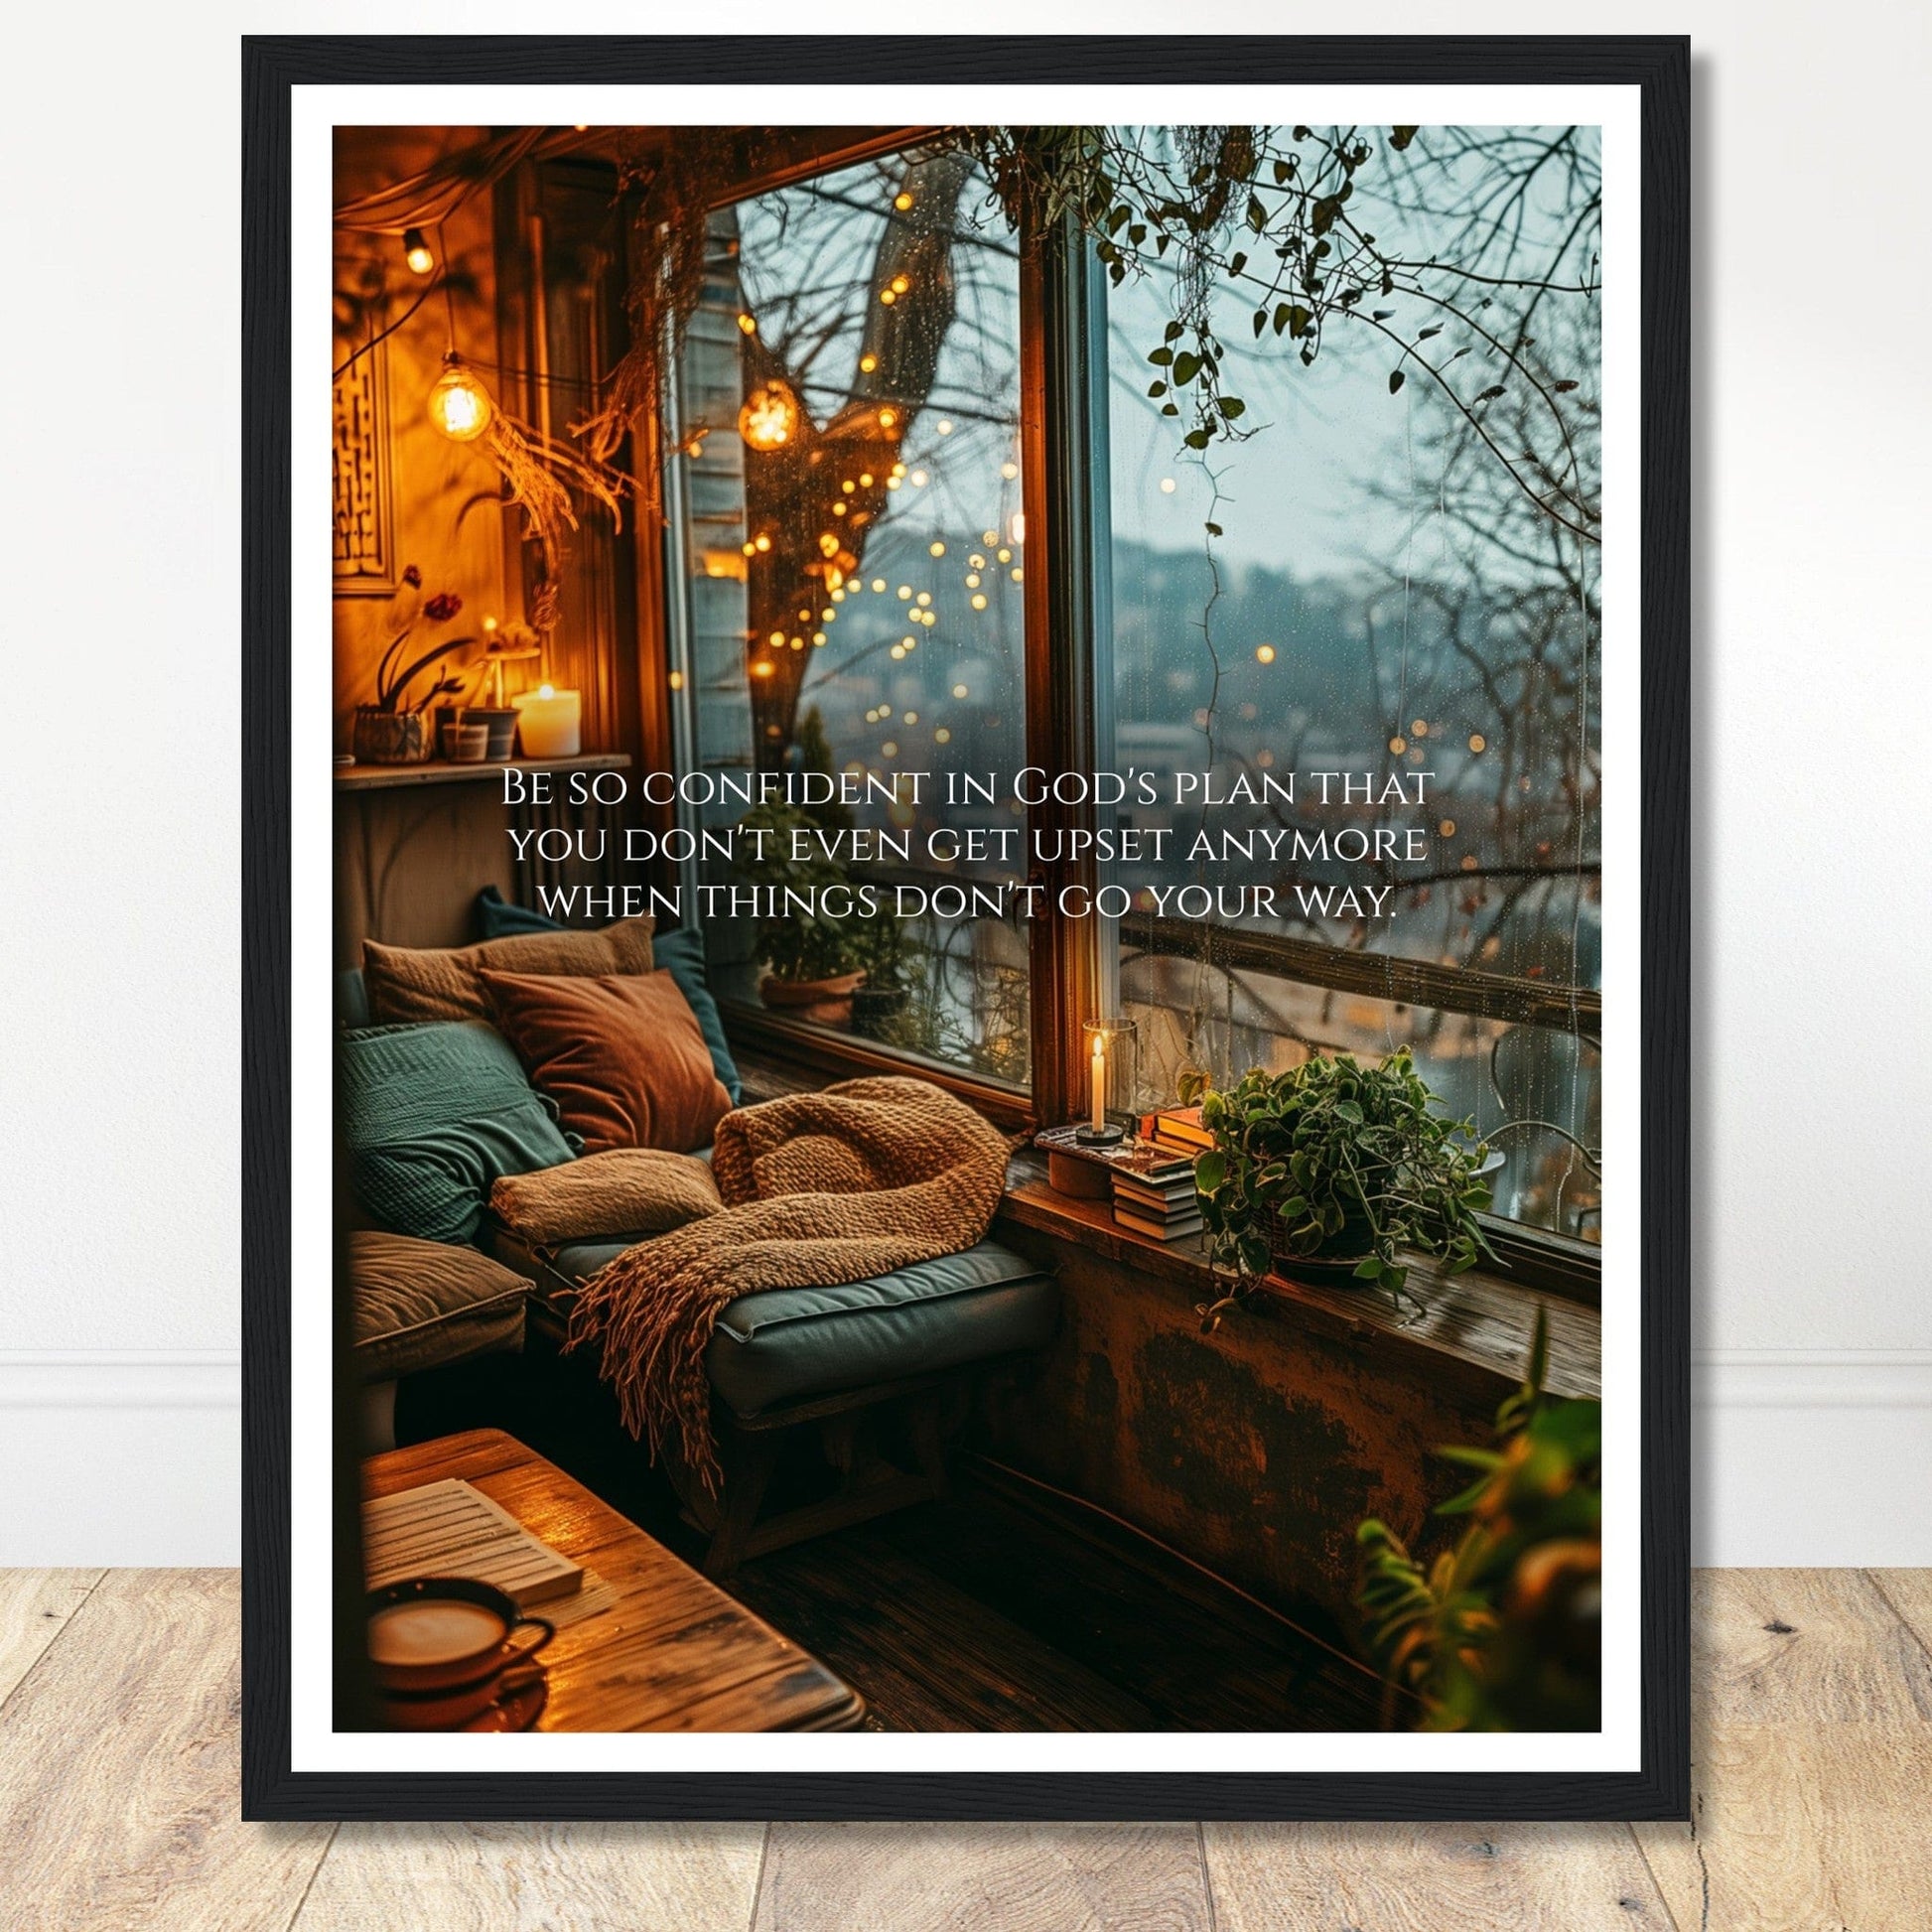 Coffee With My Father Print Material 40x50 cm / 16x20″ / Black frame Premium Matte Paper Wooden Framed Poster